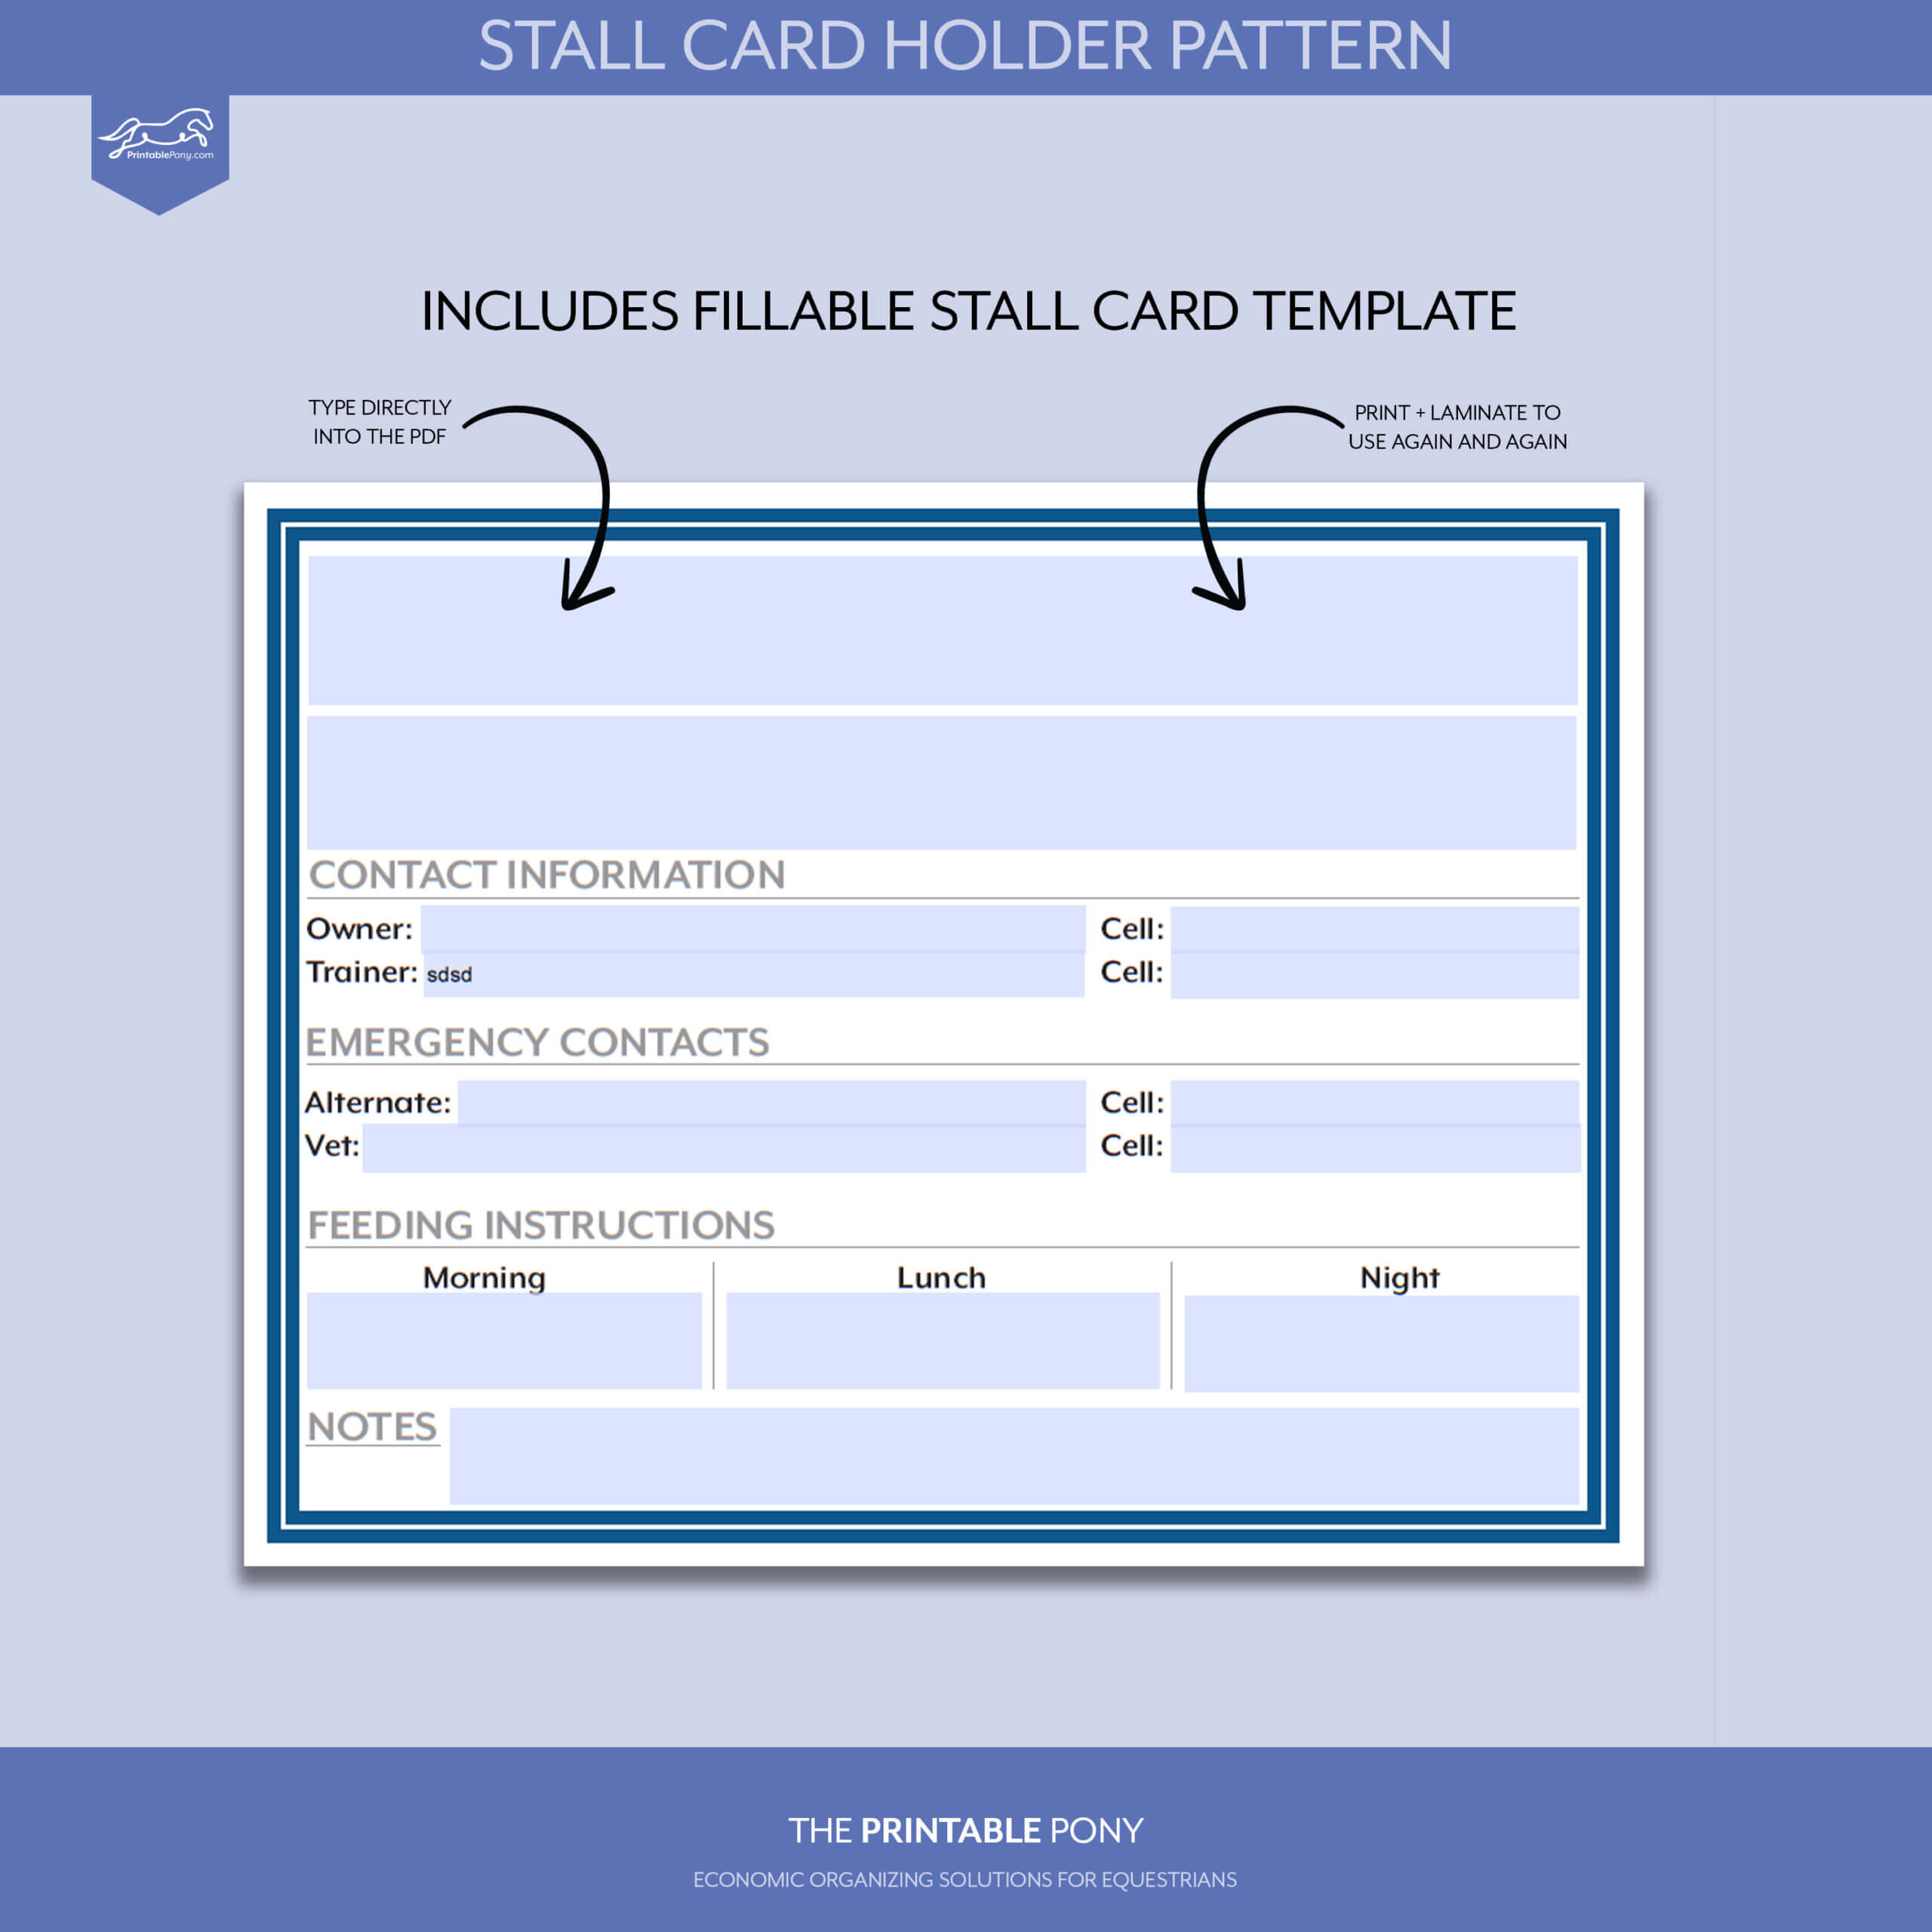 Stall Card Holder Pattern + Printable Stall Card For Horse Stall Card Template